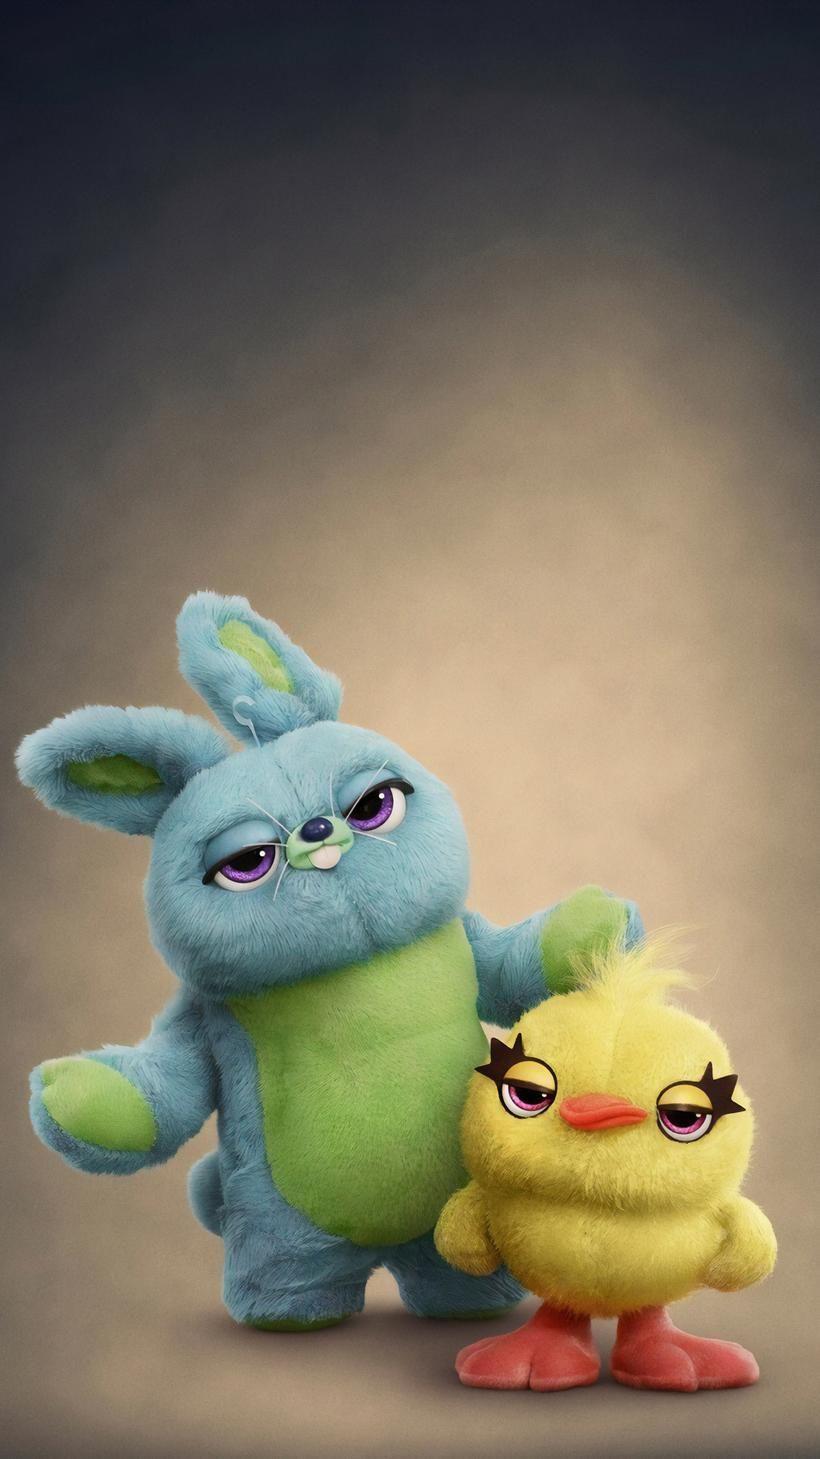 Toy Story 4 (2019) Phone Wallpaper. Disney!!!. New toy